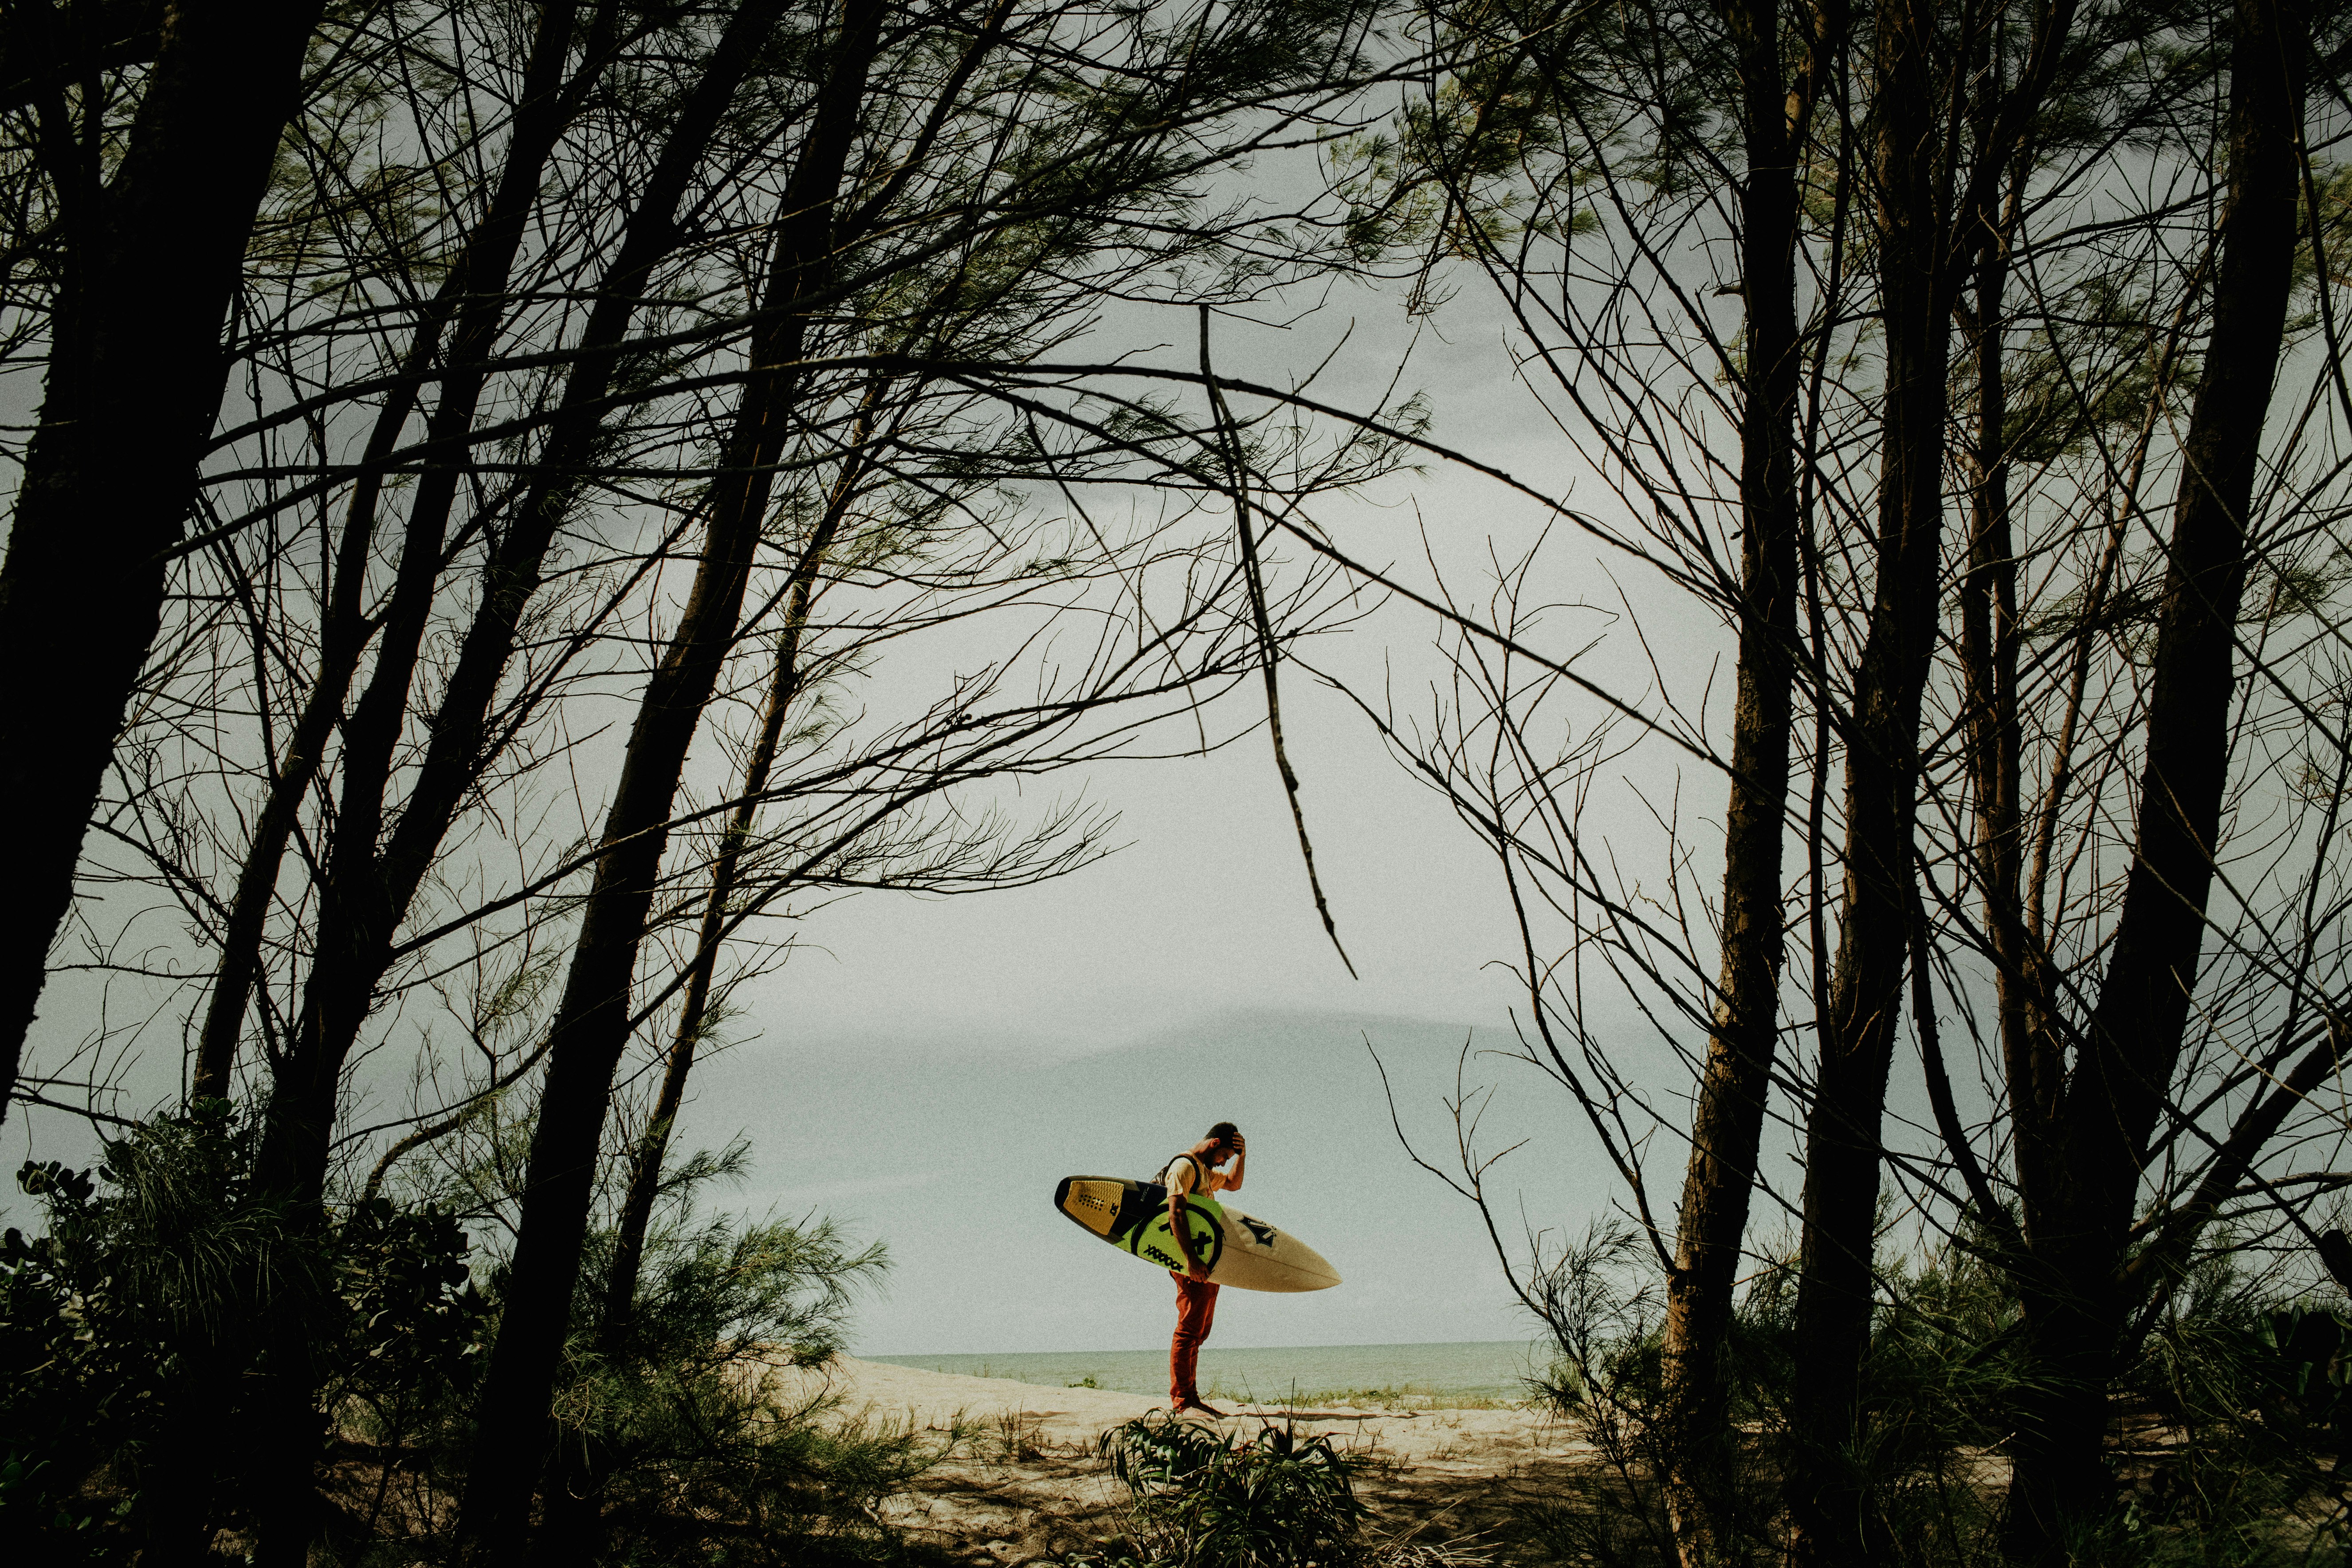 surfer holding his surfboard while standing between trees near beach